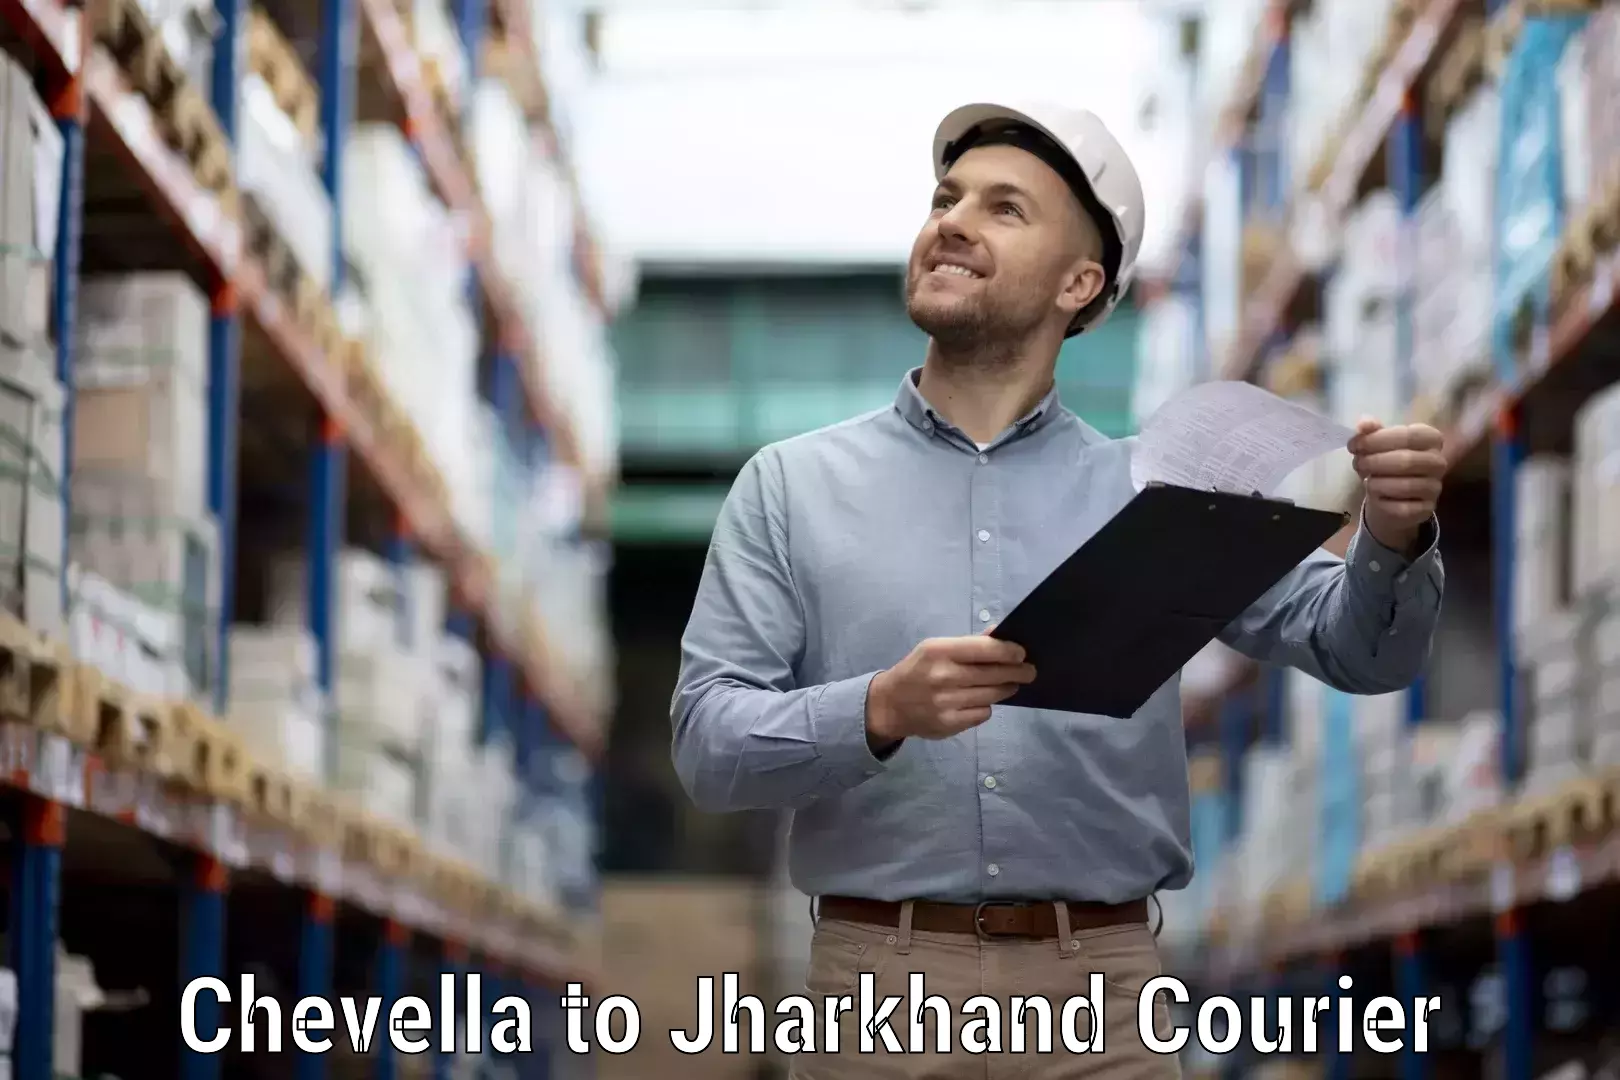 Special handling courier Chevella to Jharkhand